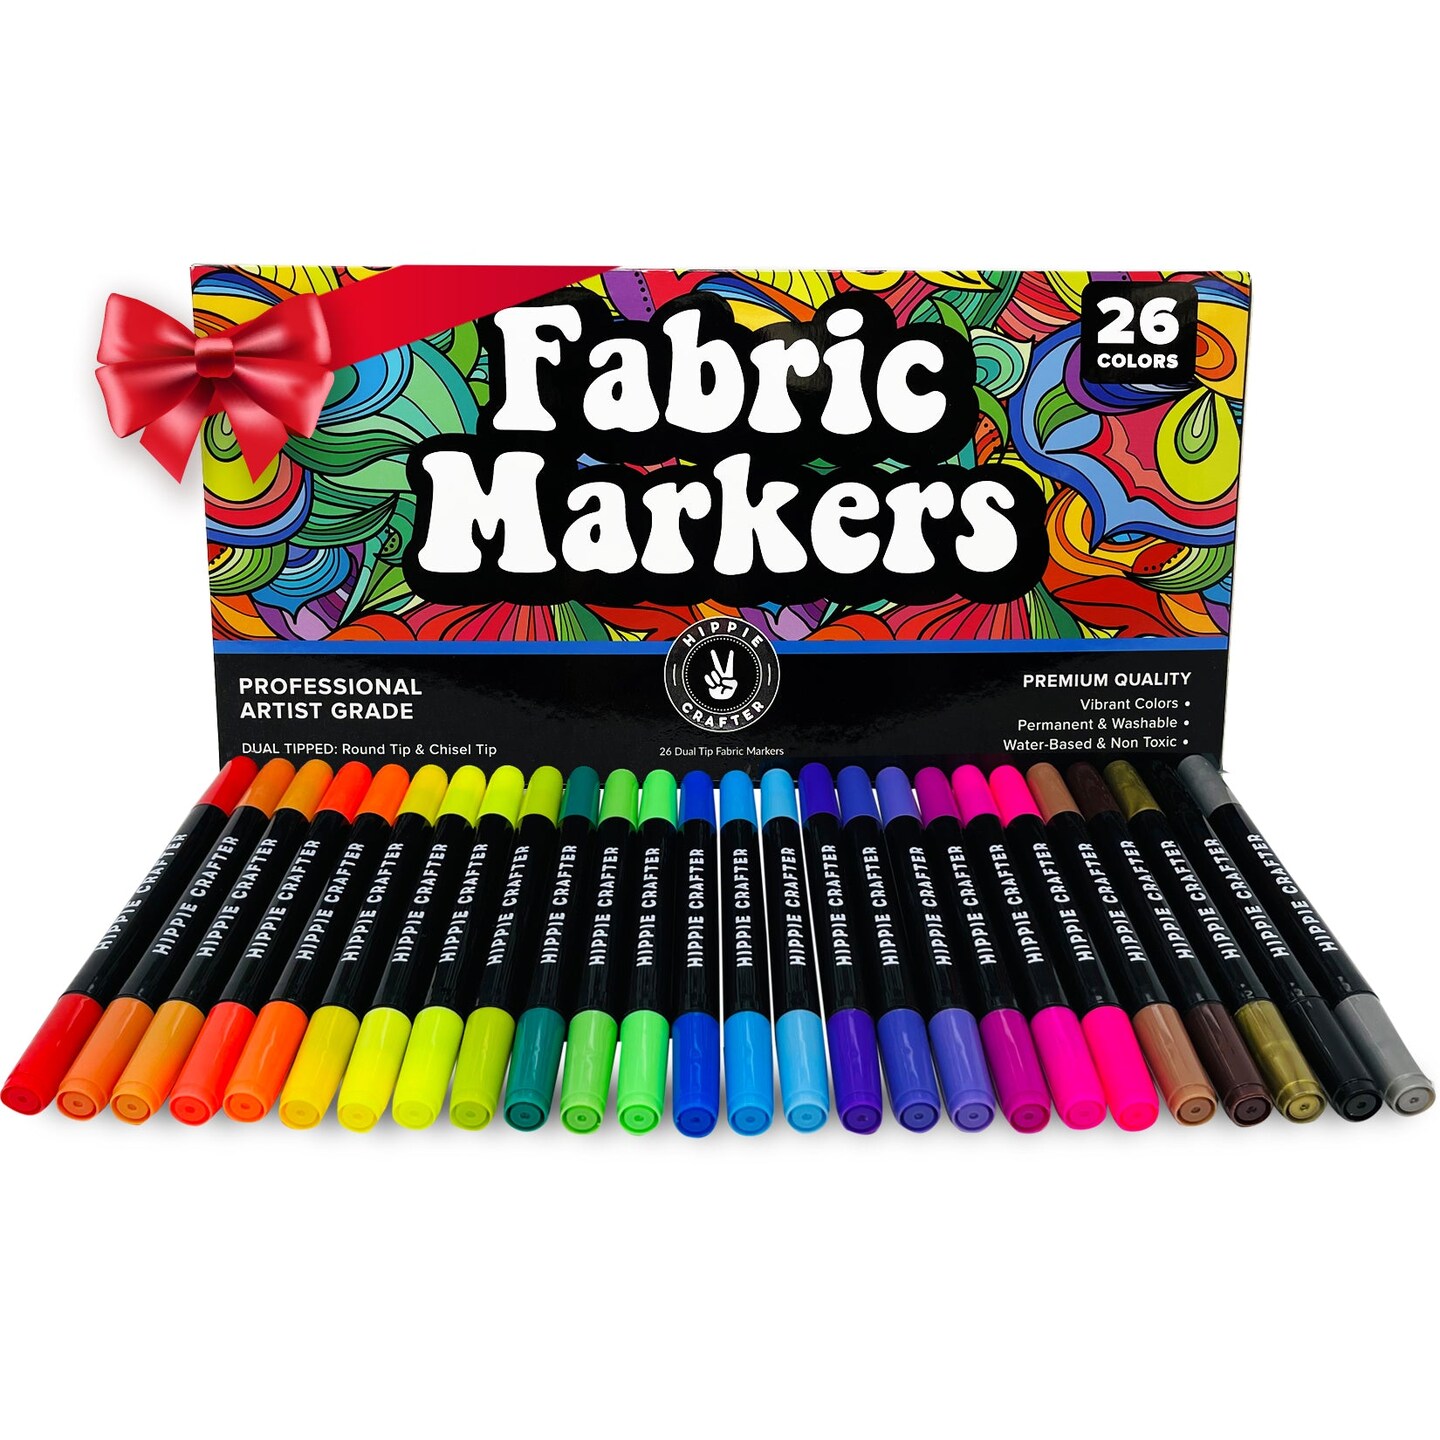 Fabric Markers Permanent for Clothes, Fabric Pens Permanent No